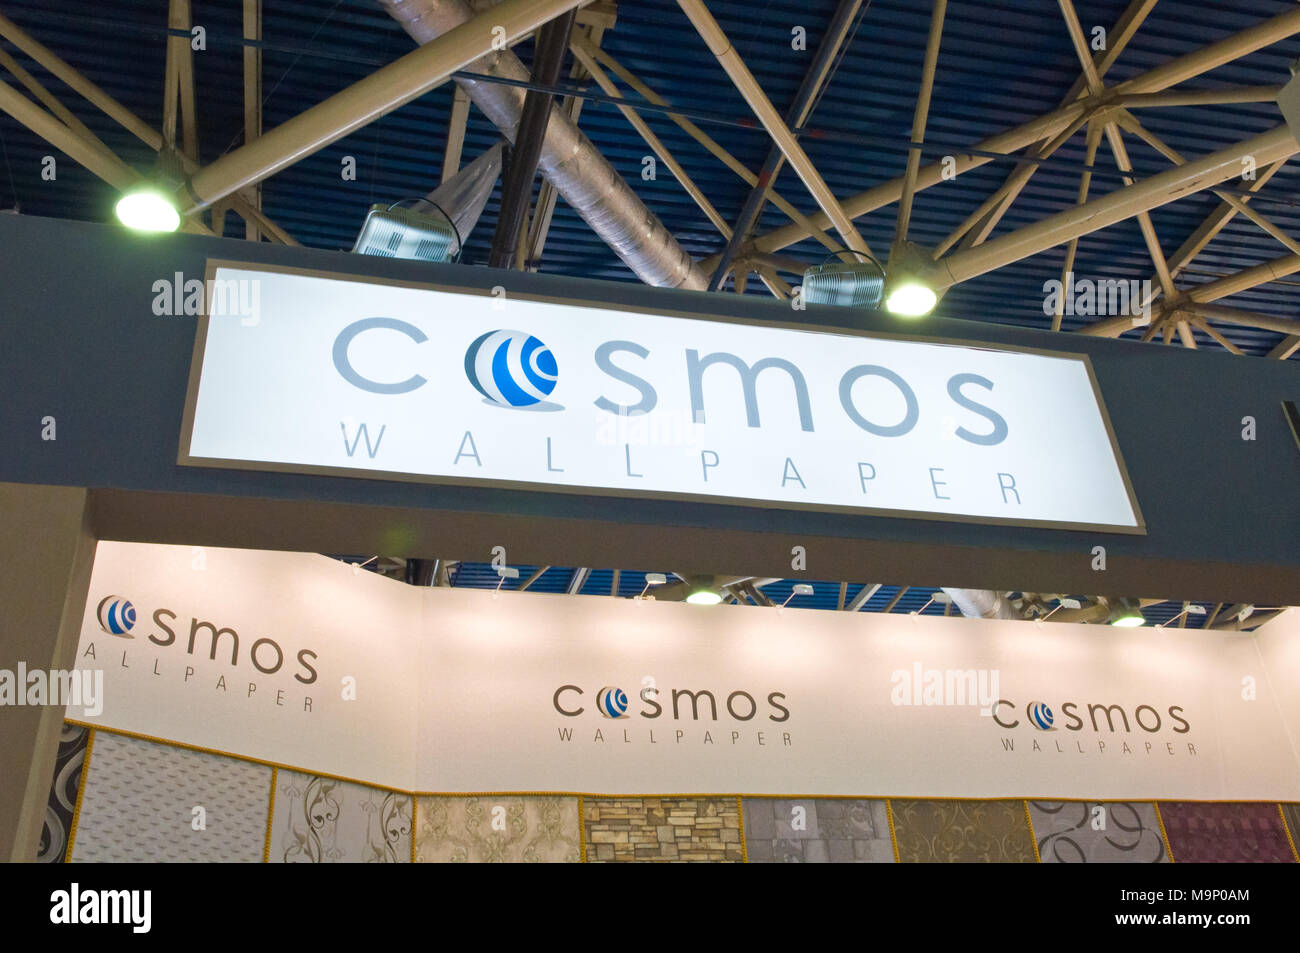 Cosmos booth at MosBuild 2013 Exhibition, april 2013, Moscow, Russia Stock Photo